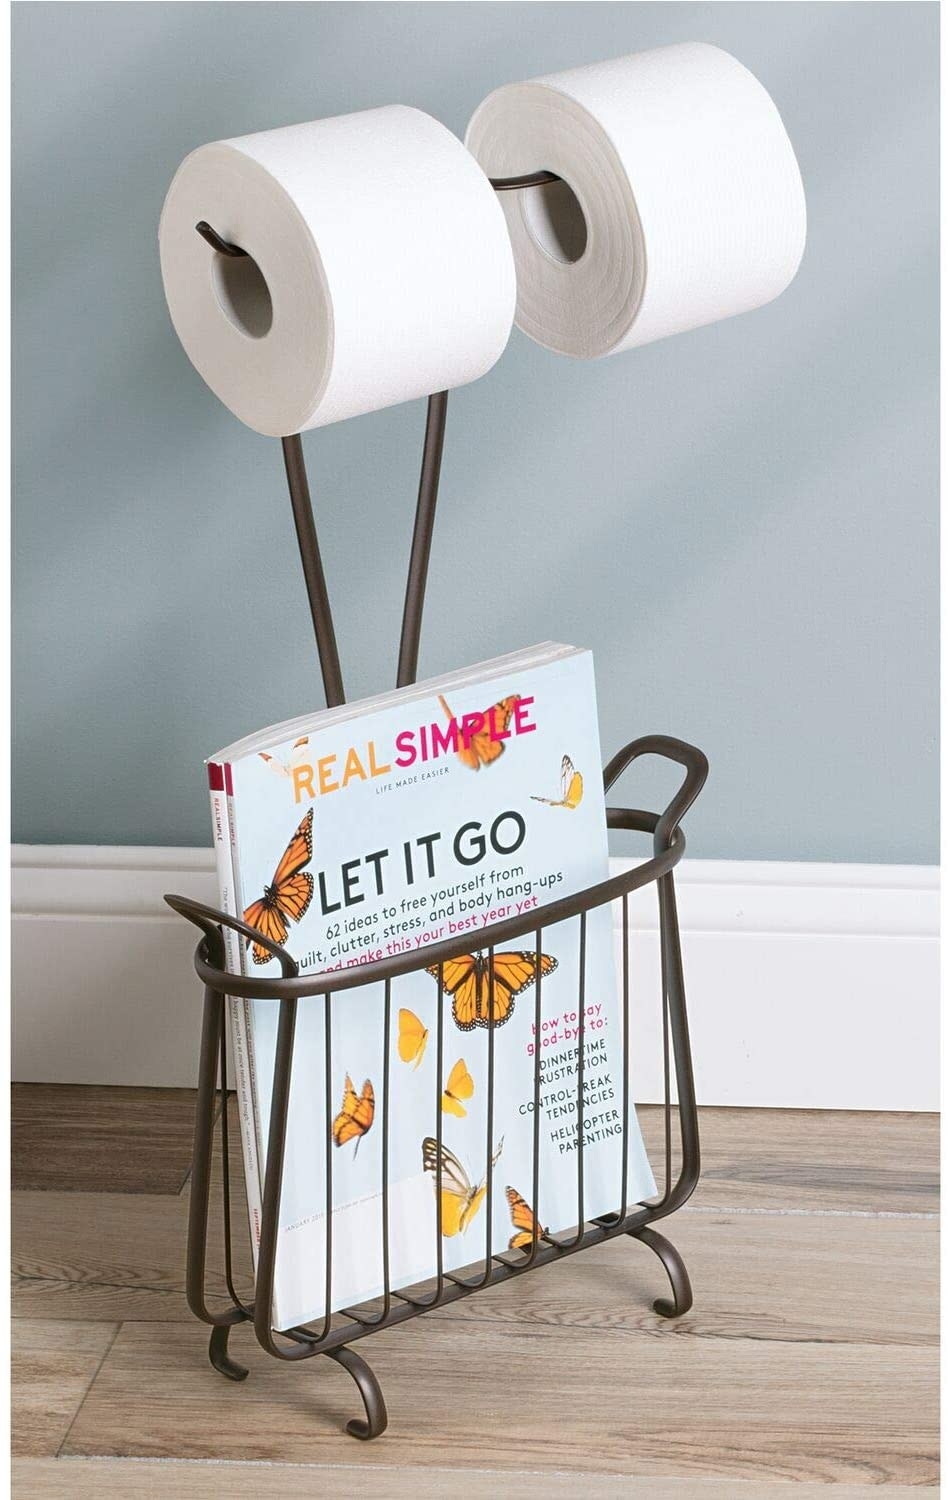 Just 25 Useful Toilet-Related Products